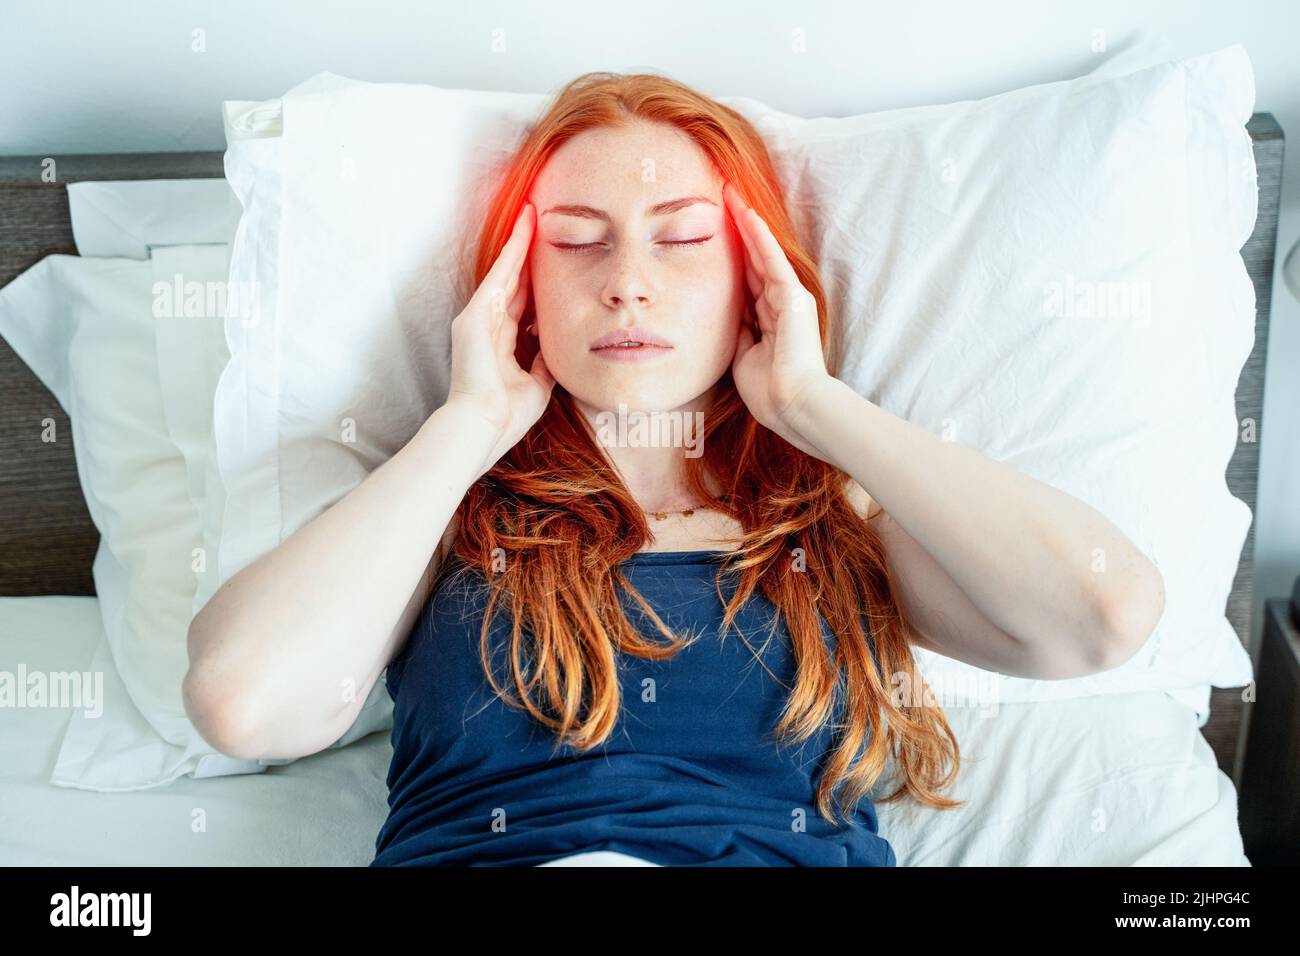 One woman suffering insomnia disturbed by head pain Stock Photo